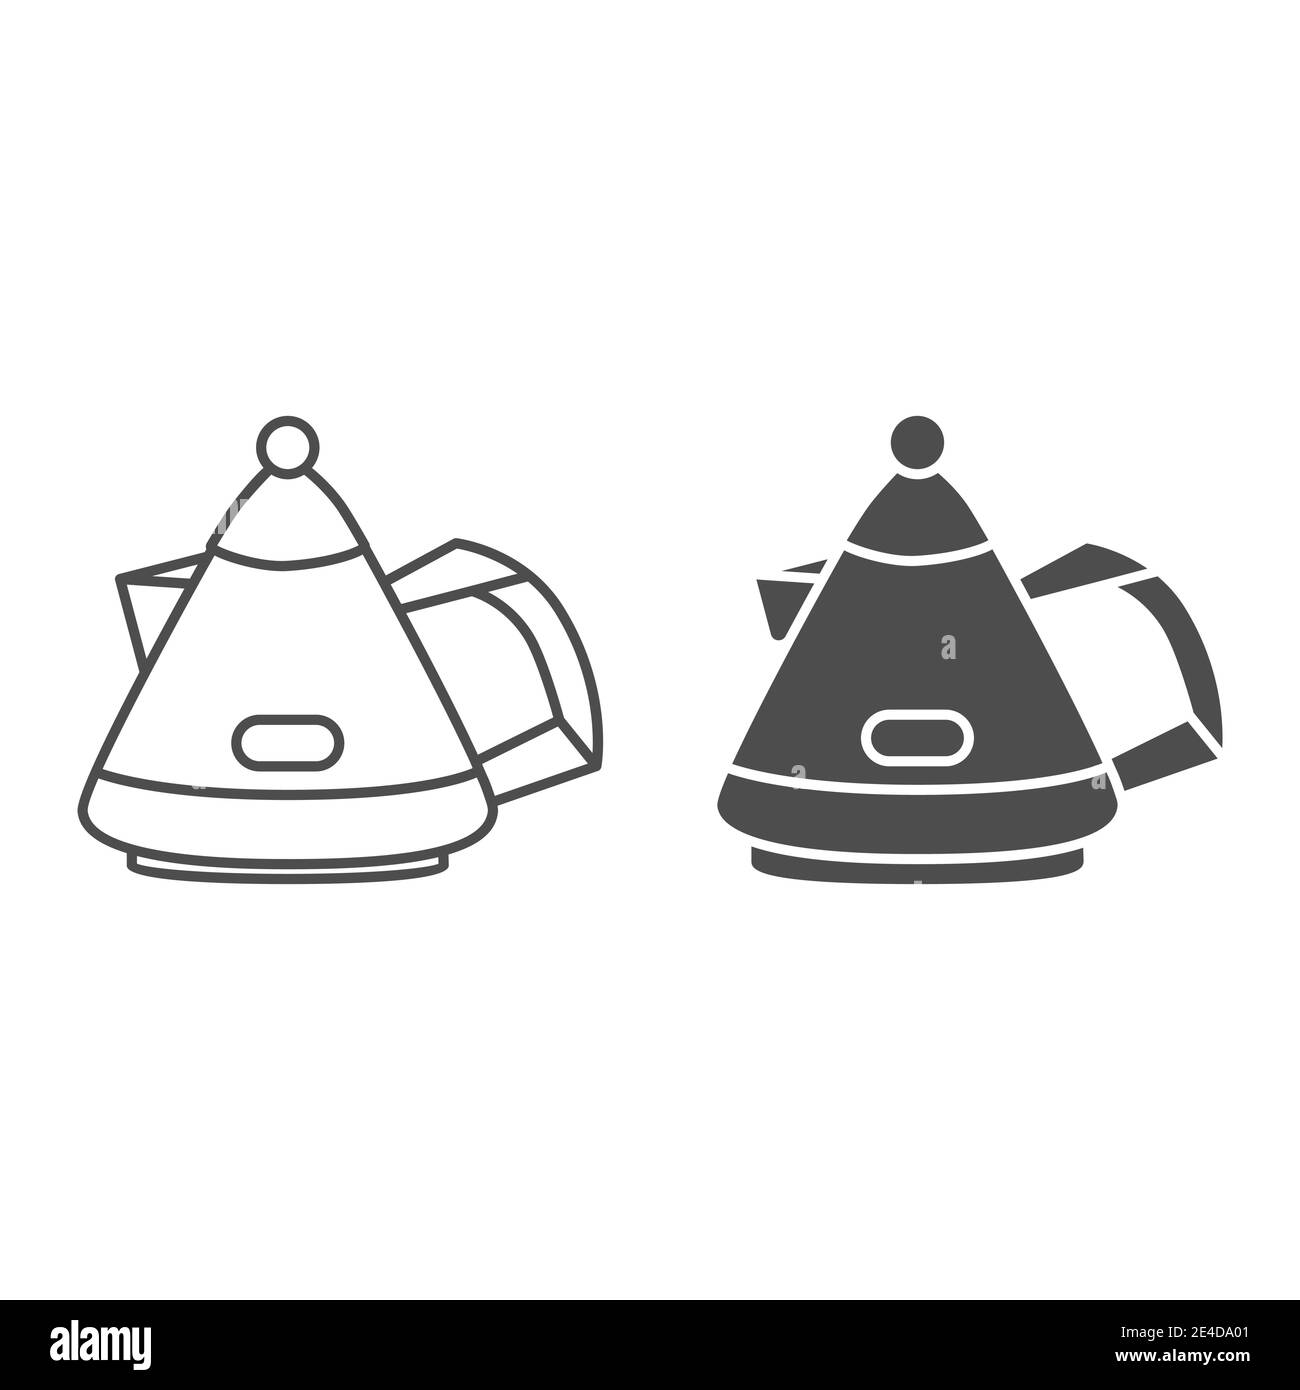 Modern teapot line and solid icon, kitchenware concept, Tea kettle sign on white background, kettle for boiling water and cooking tea icon in outline Stock Vector